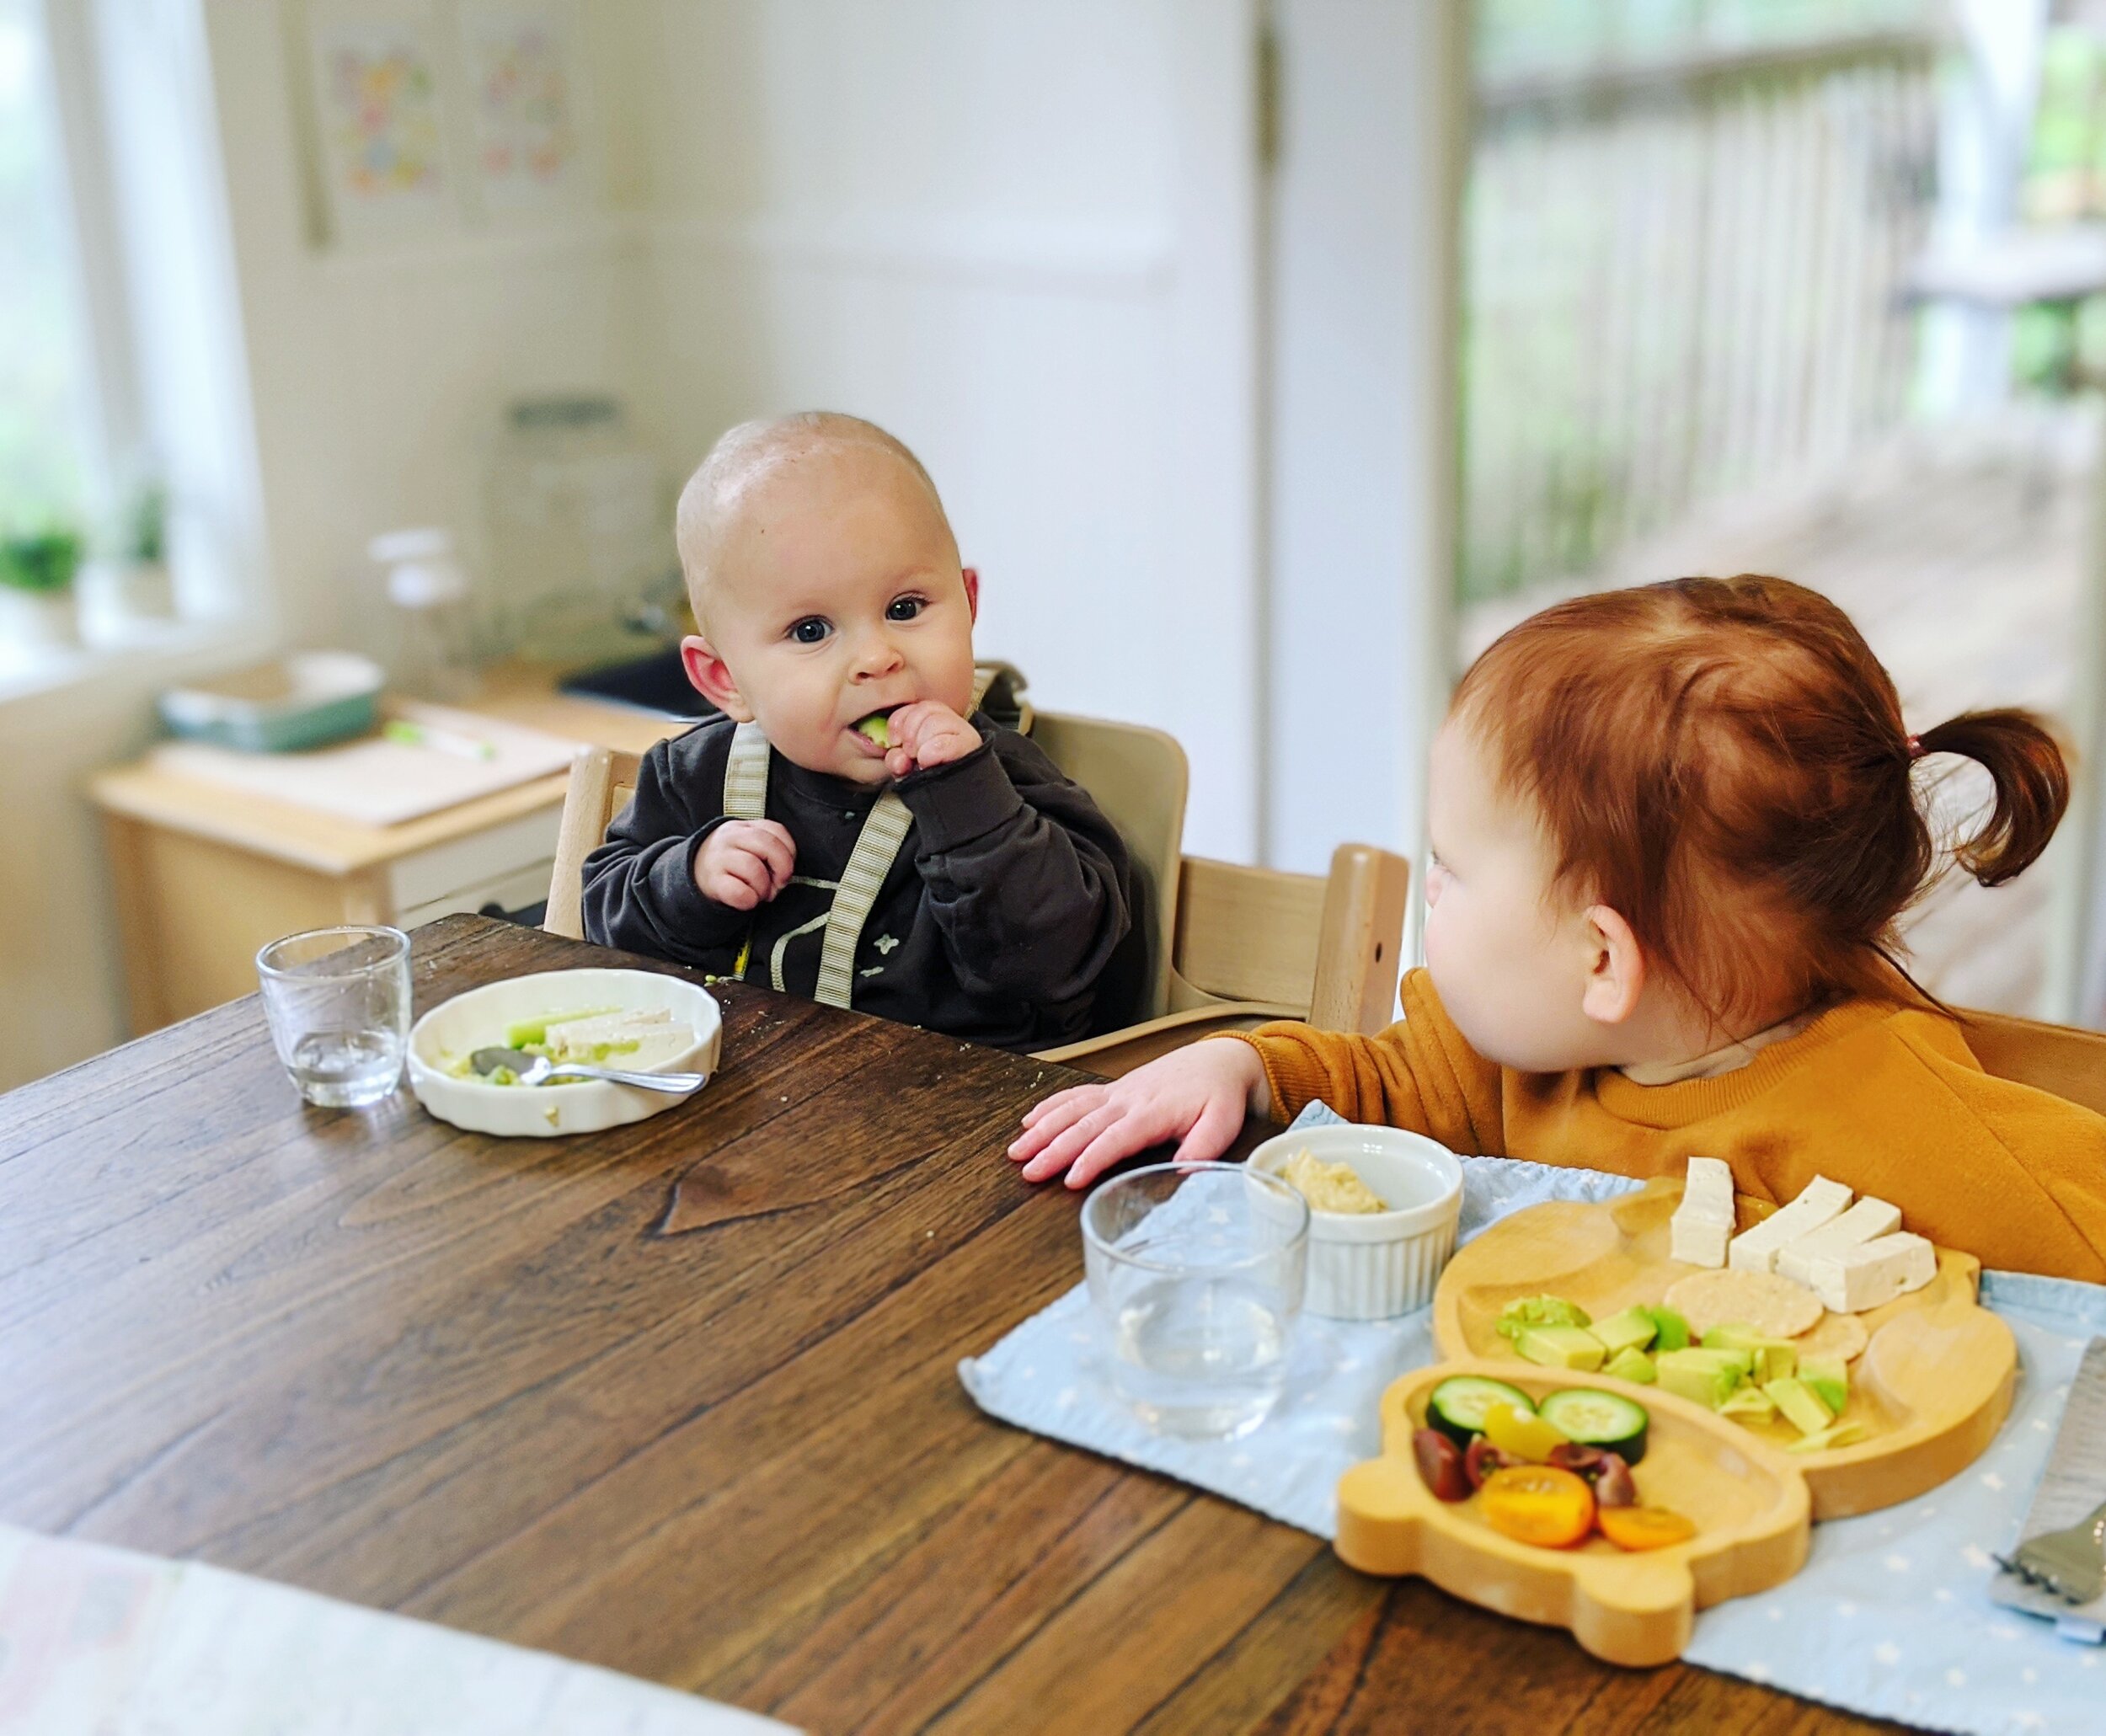 https://images.squarespace-cdn.com/content/v1/5b5f73b331d4dfc166995aa7/1587303493578-0L7MSCNUHBLLZQN1WZLN/Baby-Led+Weaning%2C+Montessori+Style+-+Montessori+in+Real+Life